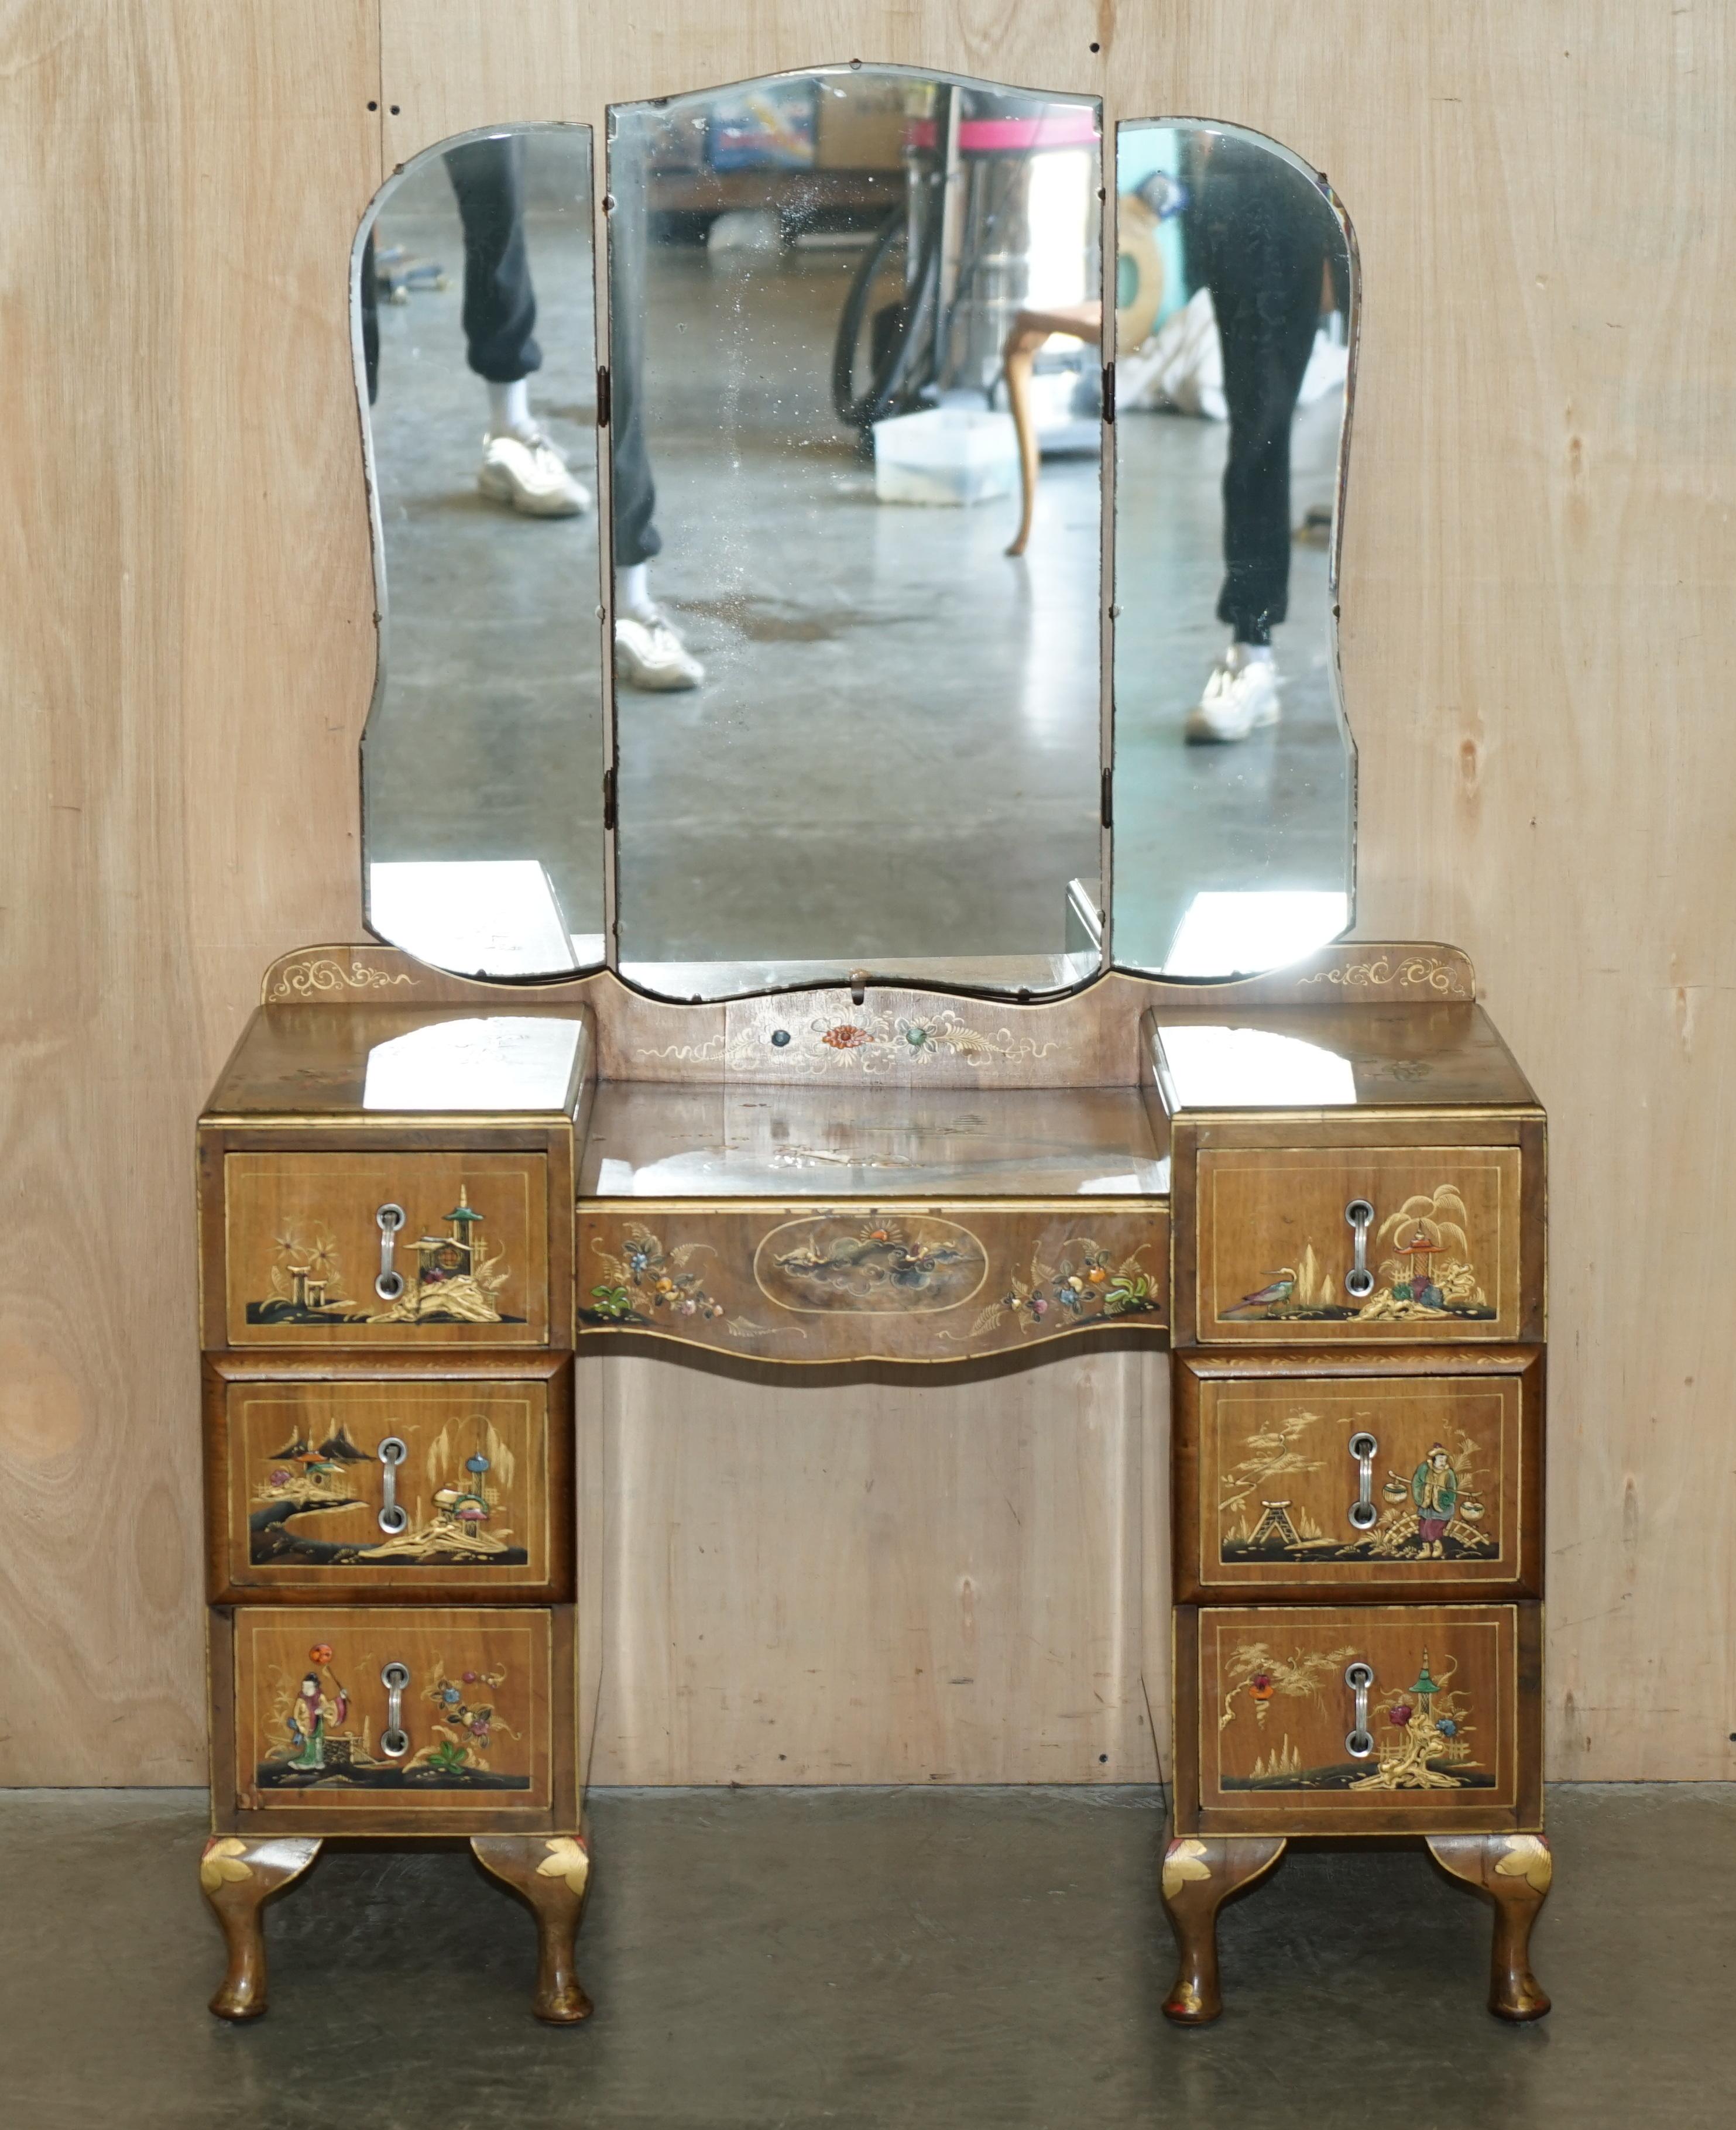 Royal House Antiques

Royal House Antiques is delighted to offer for sale this stunning original circa 1920's Hand made Chinese Chinoiserie dressing table with tri folding mirrors which is part of a suite 

Please note the delivery fee listed is